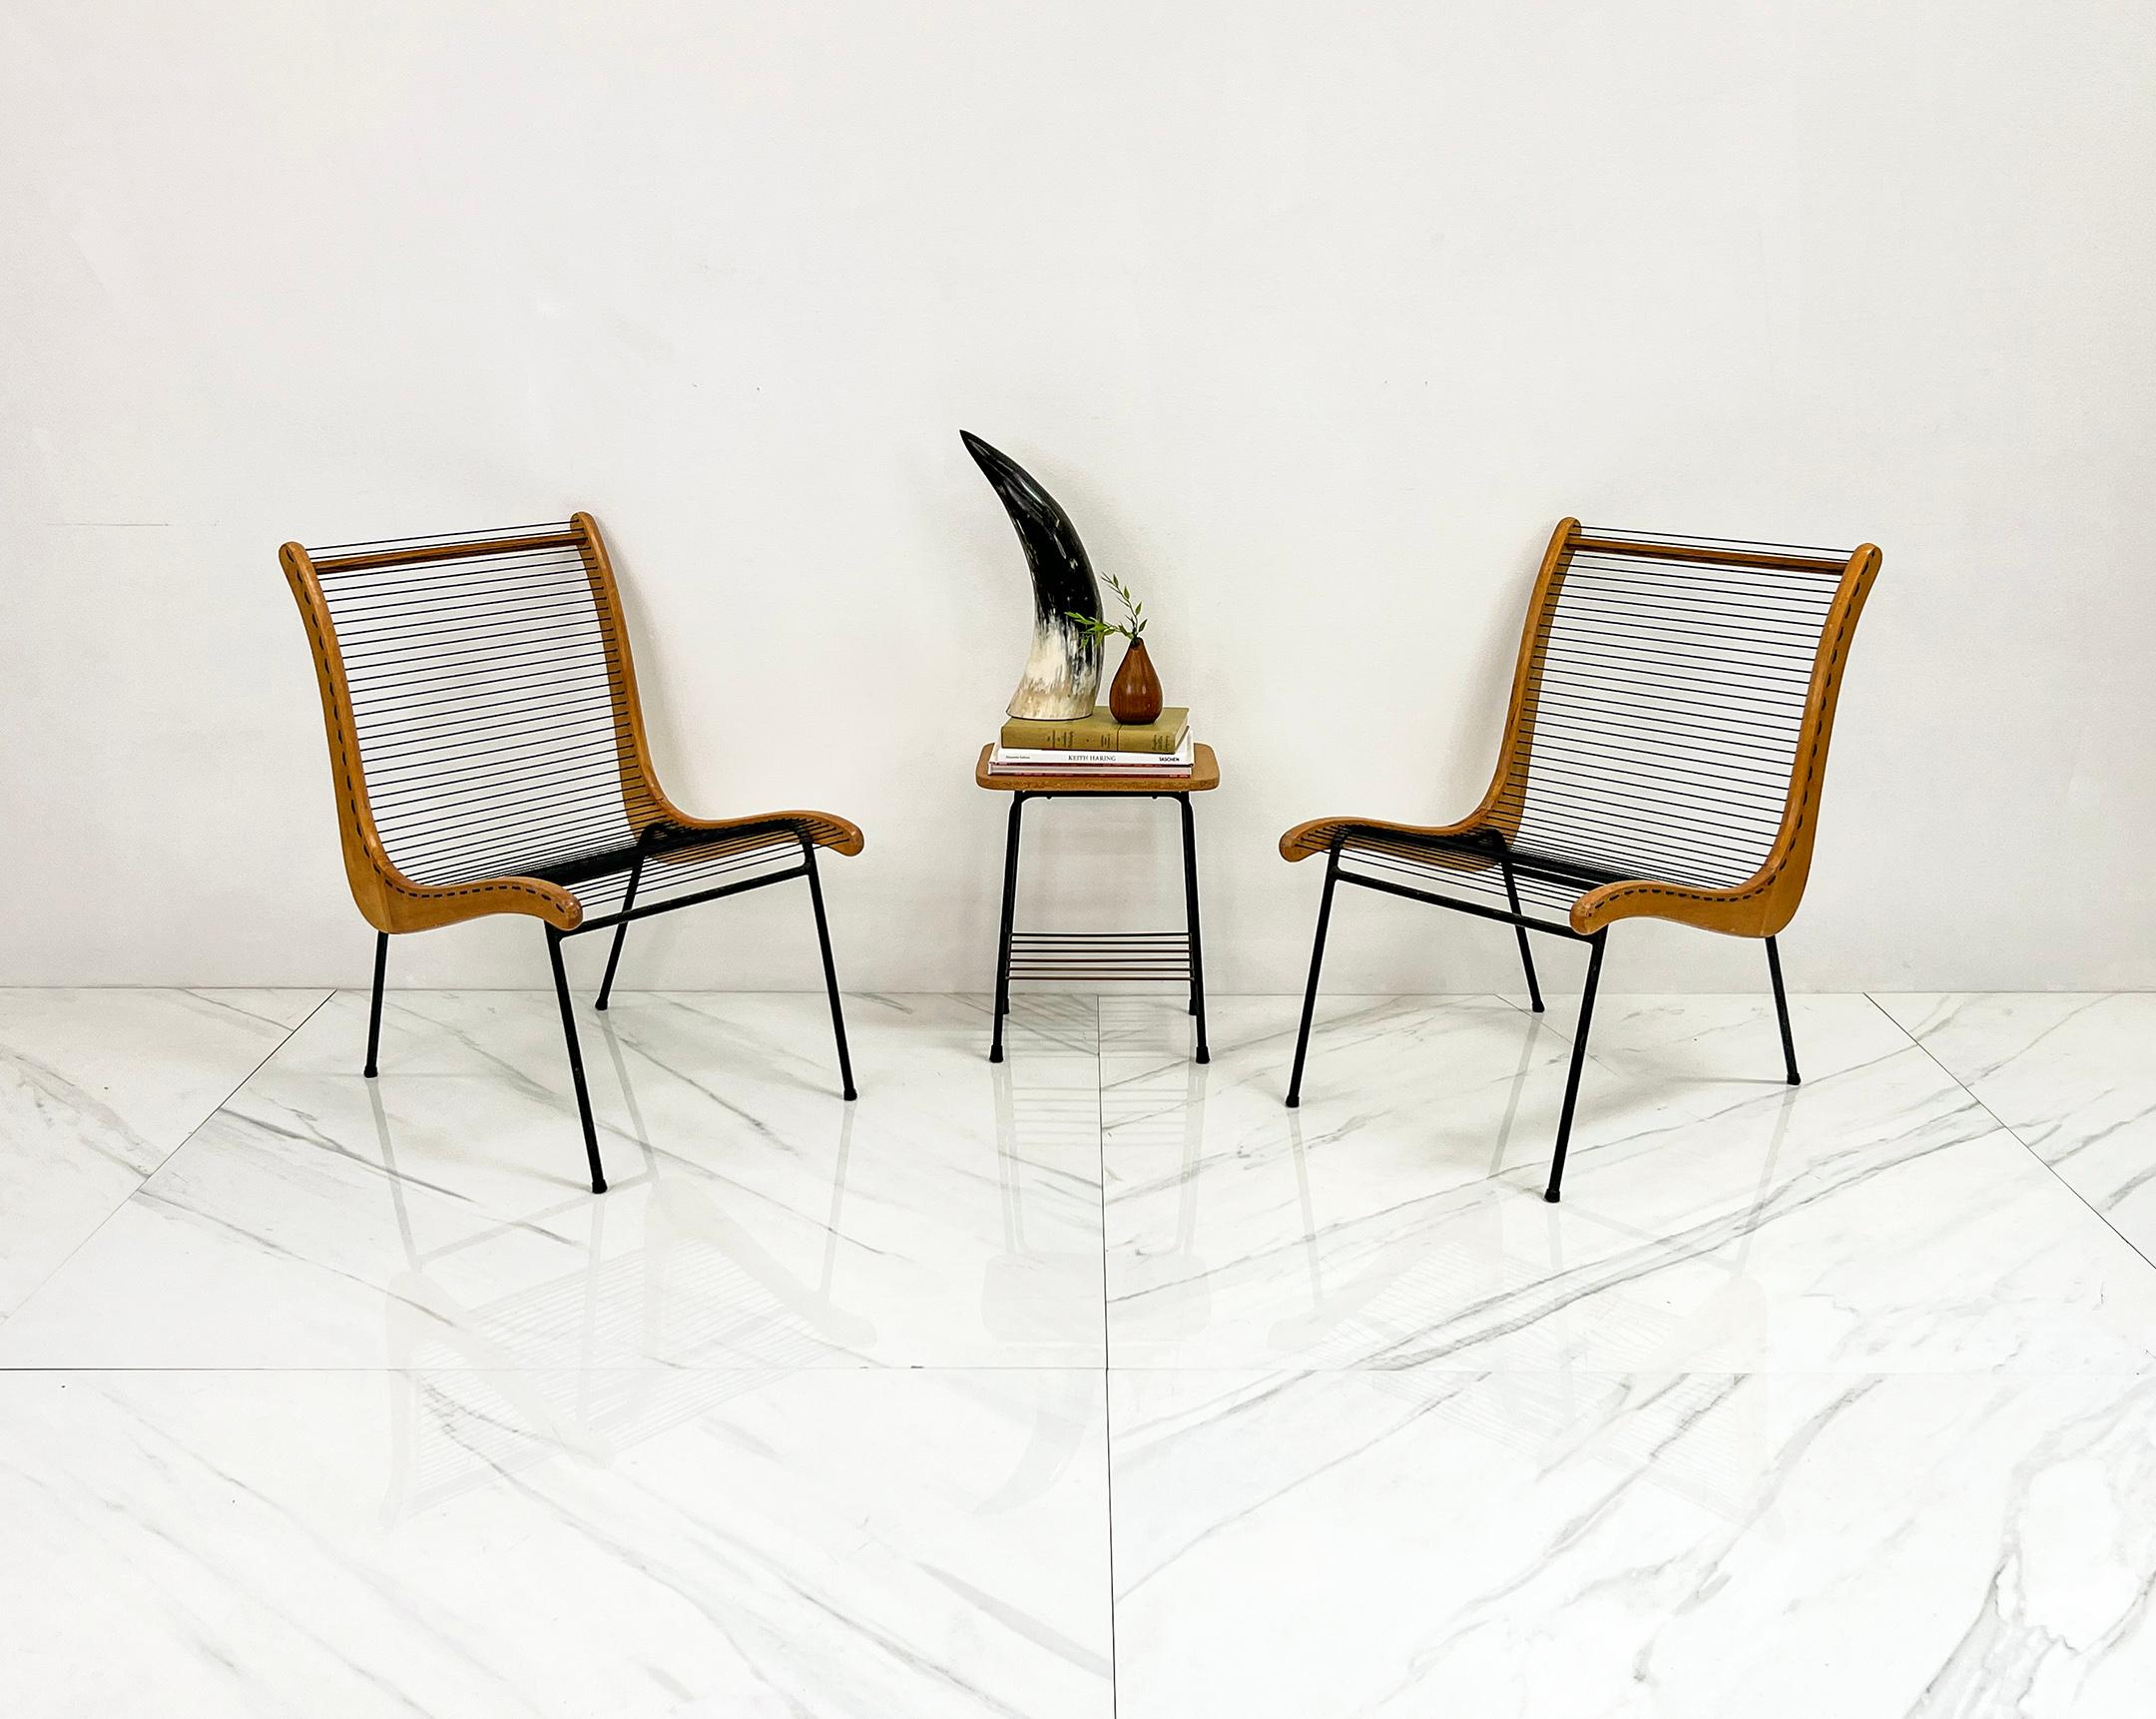 Mid-Century Modern String Chairs With Matching Table by Carl Koch, Vermont Tubbs, 1950's For Sale